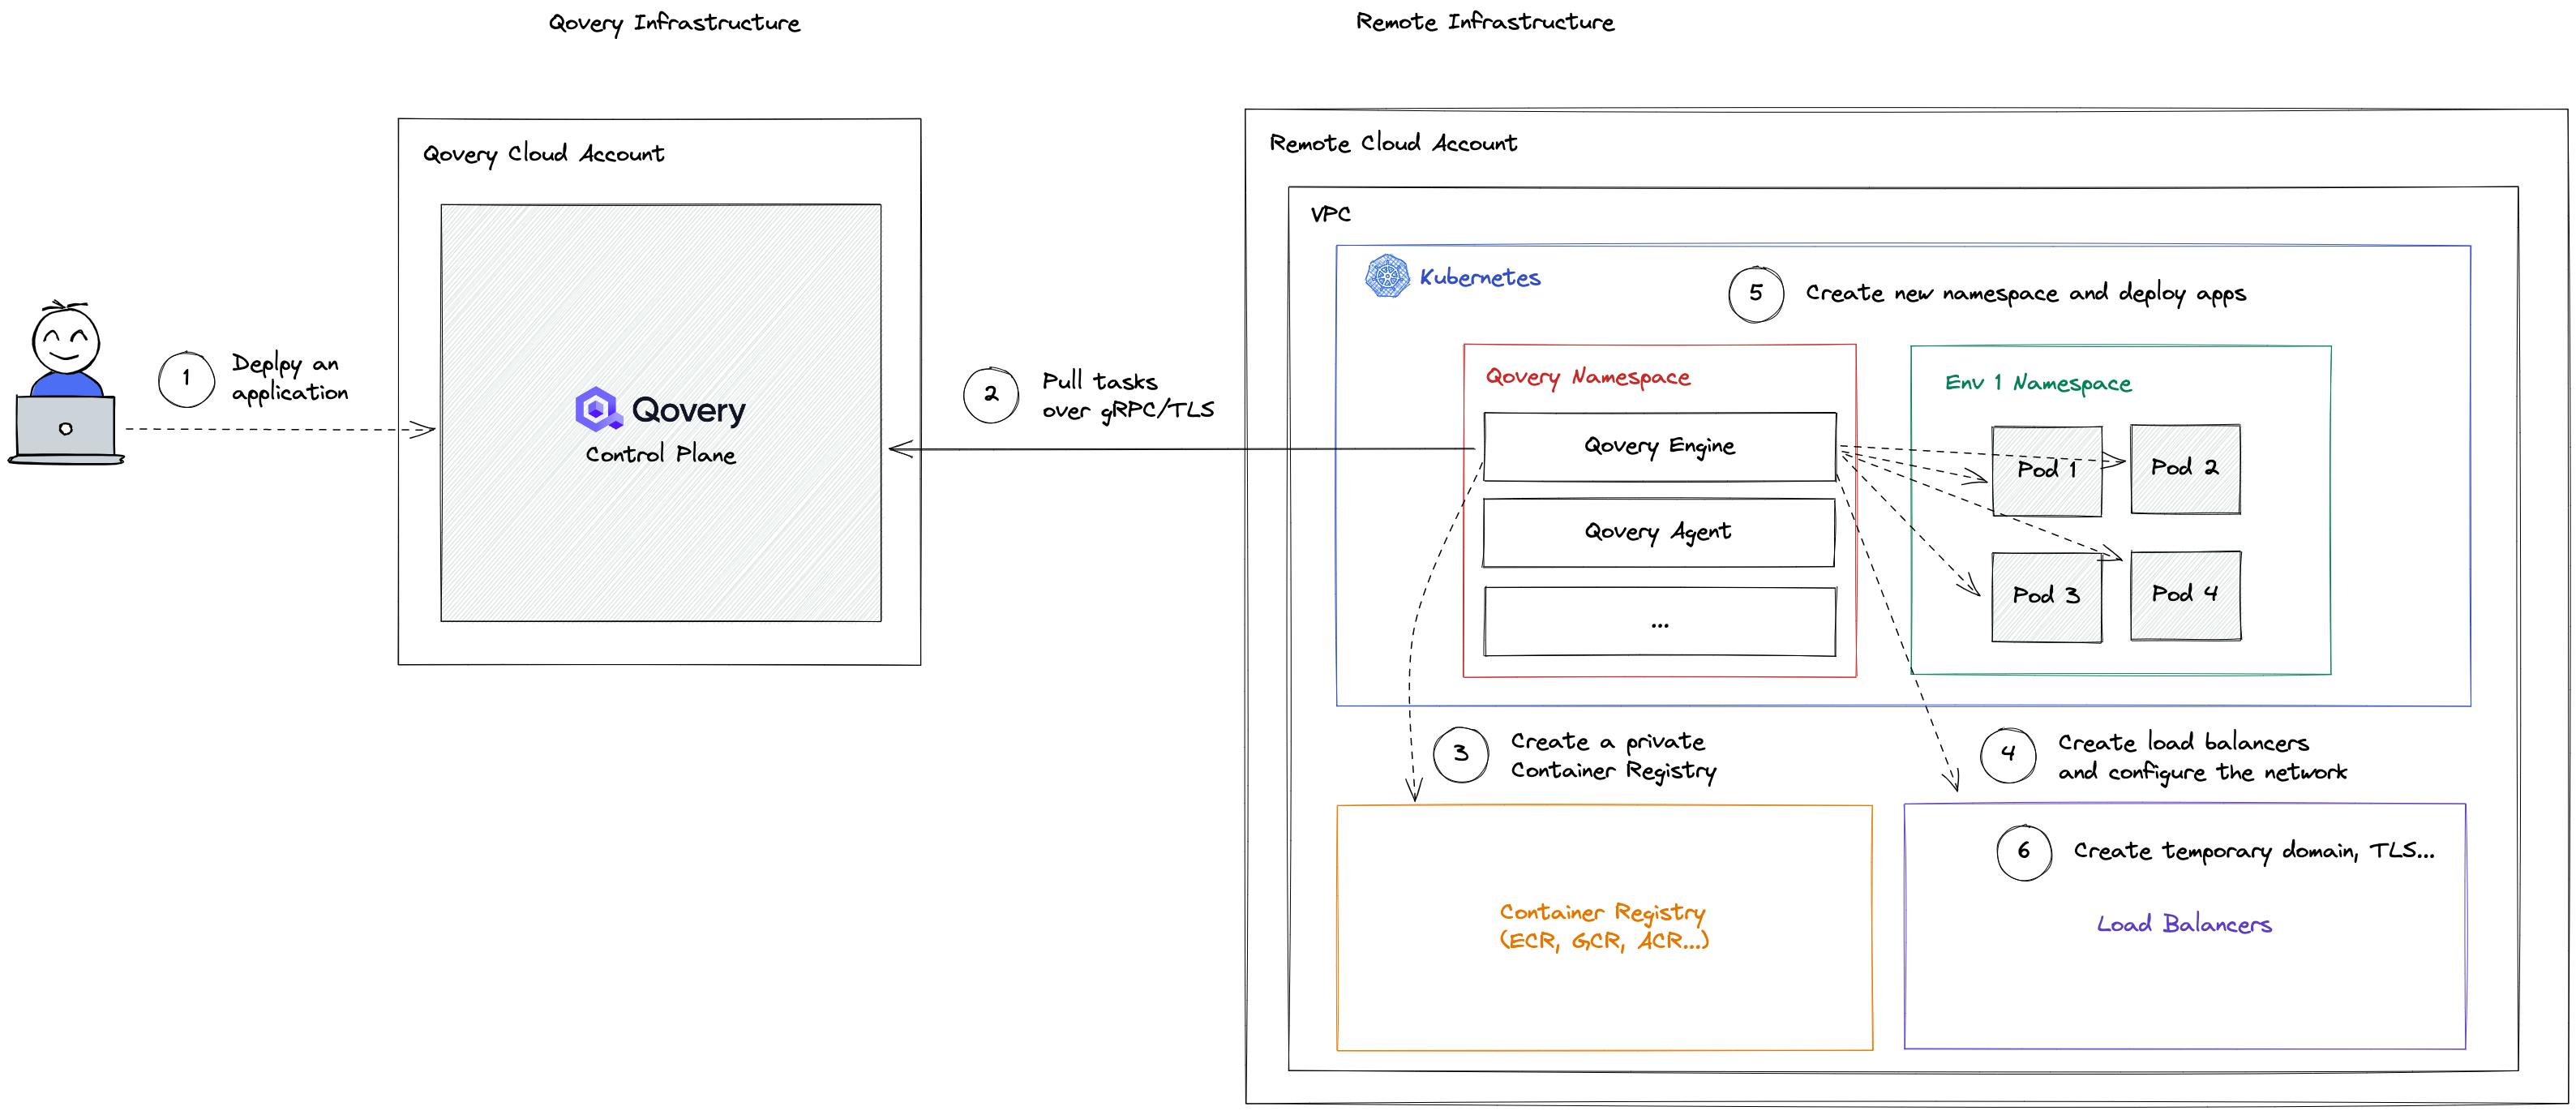 Qovery Engine pulls tasks from the Qovery Control Plane and executes those tasks on the Kubernetes cluster. Note that the Qovery Engine intiates the connection to the Qovery Control Plane.